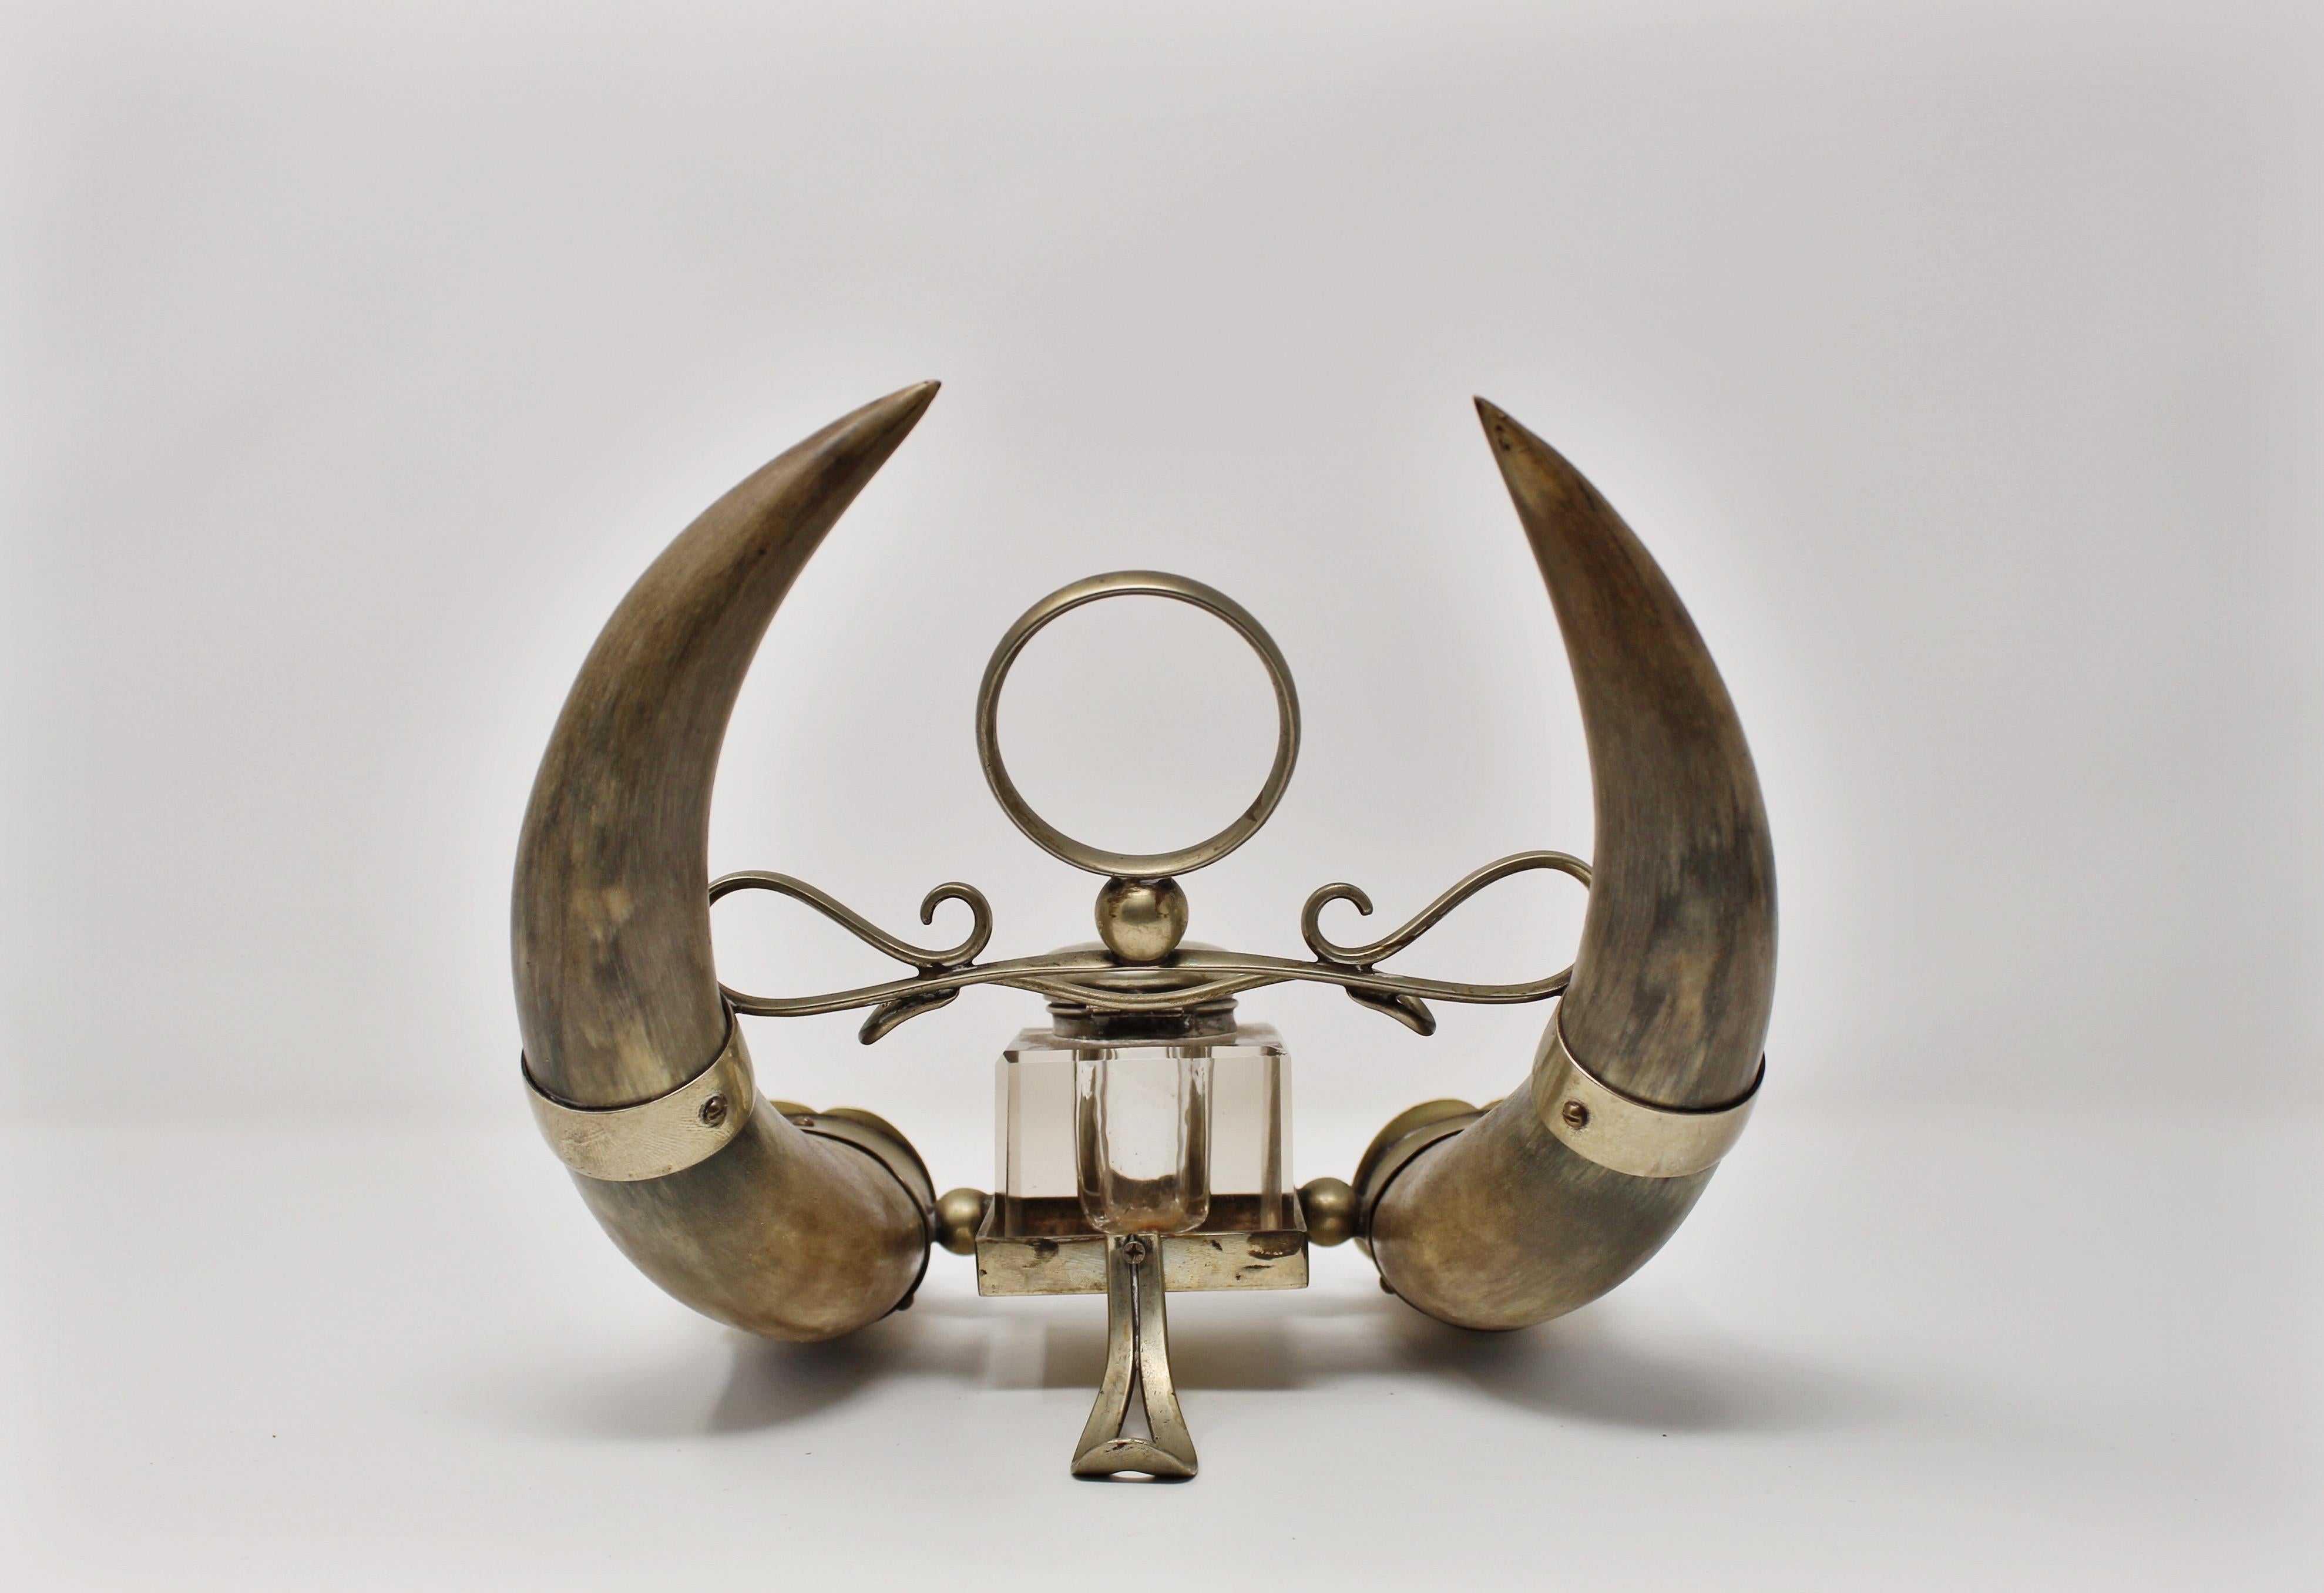 Hand-Crafted 19th Century Horn Inkwell